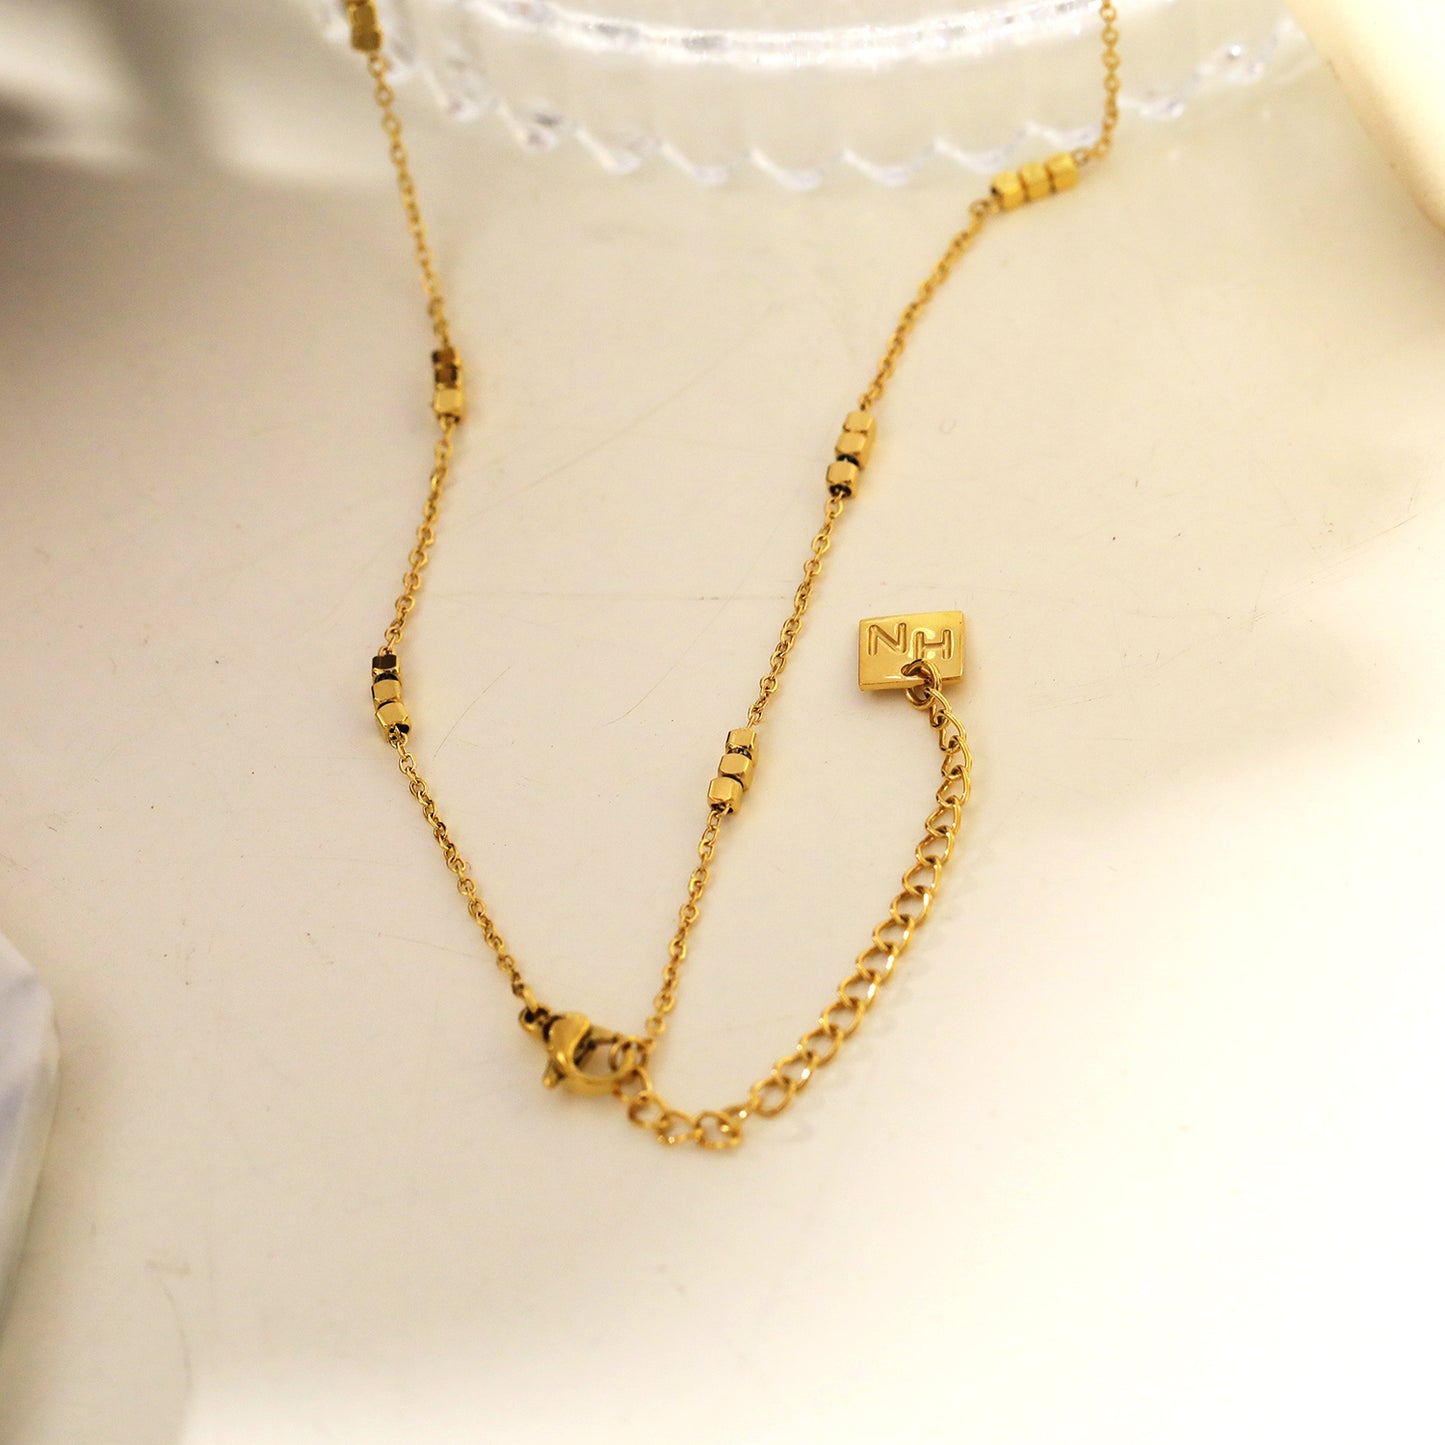 ERISSA: Tiny Square-Beads Dainty Gold Chain Necklace